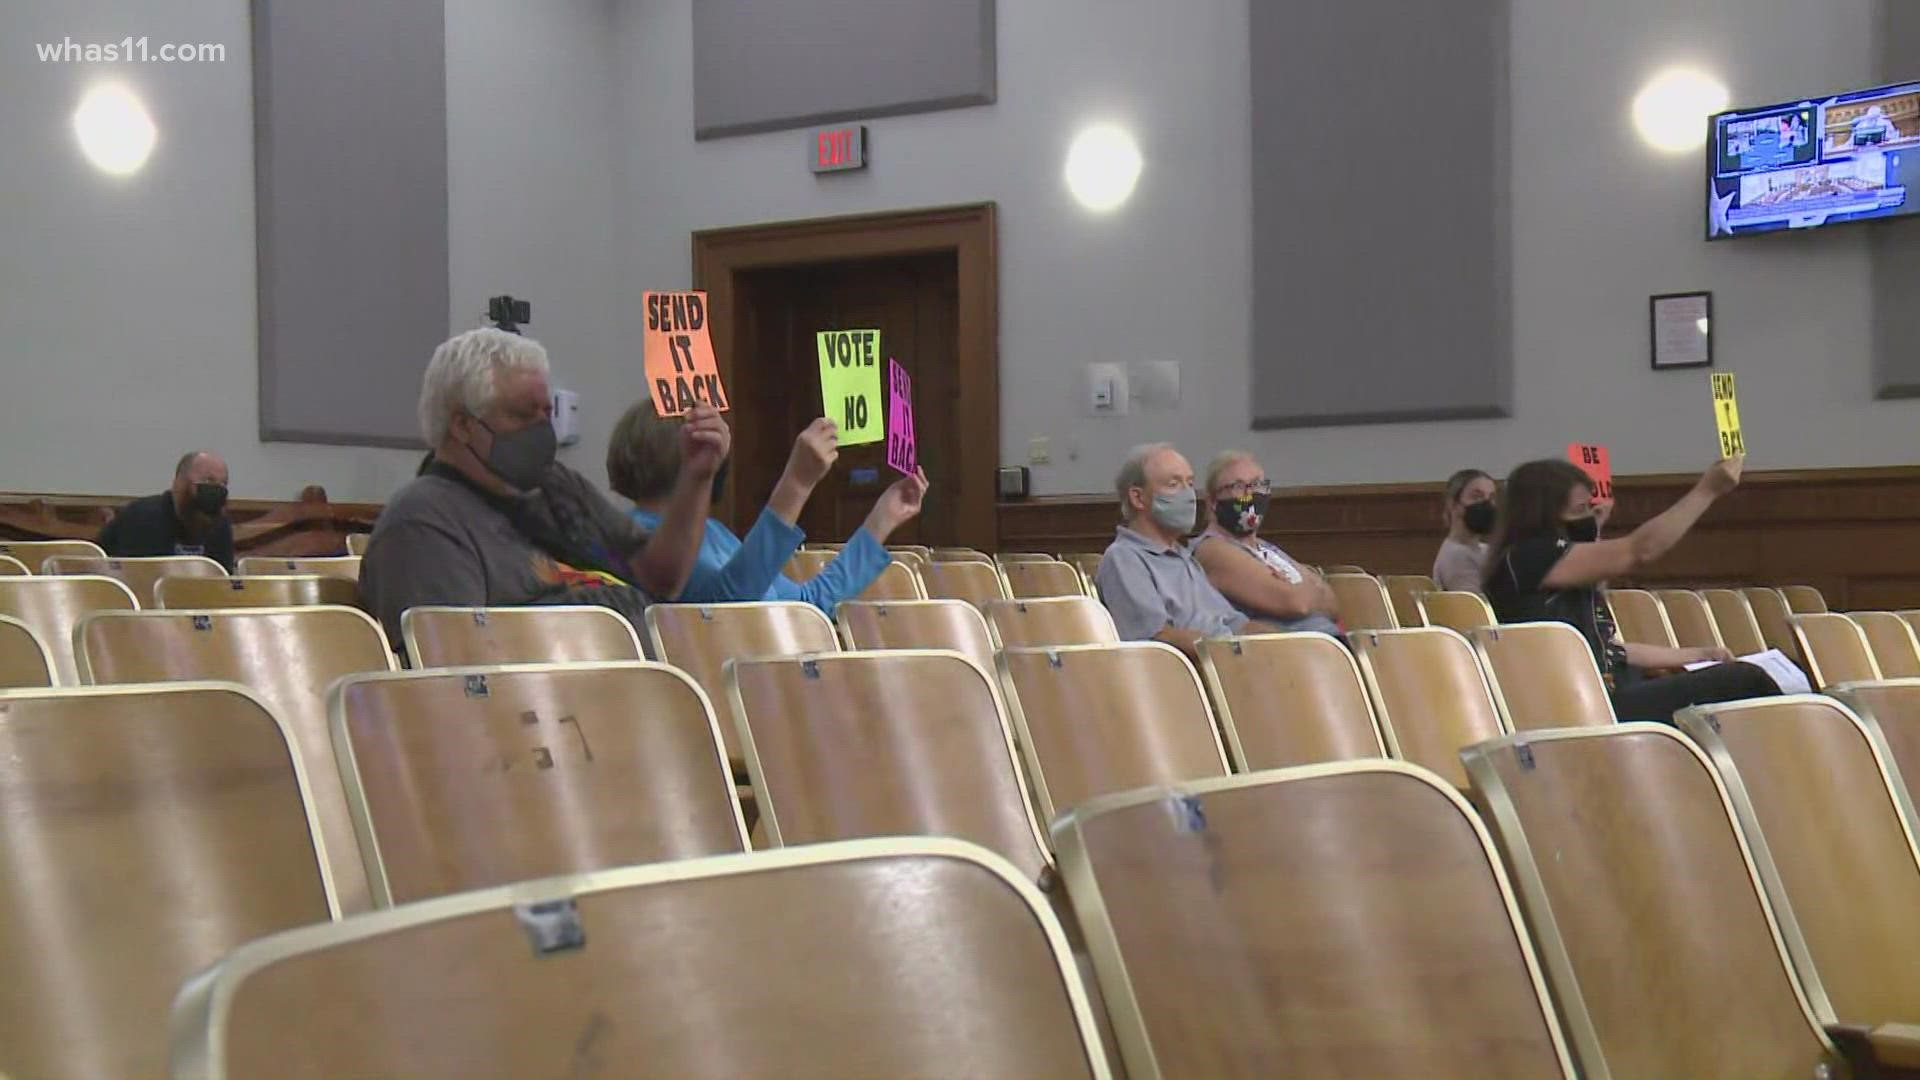 As LMPD union members vote on a tentative contract with the city, the public got their first opportunity to weigh in on the proposal and opinions are mixed.